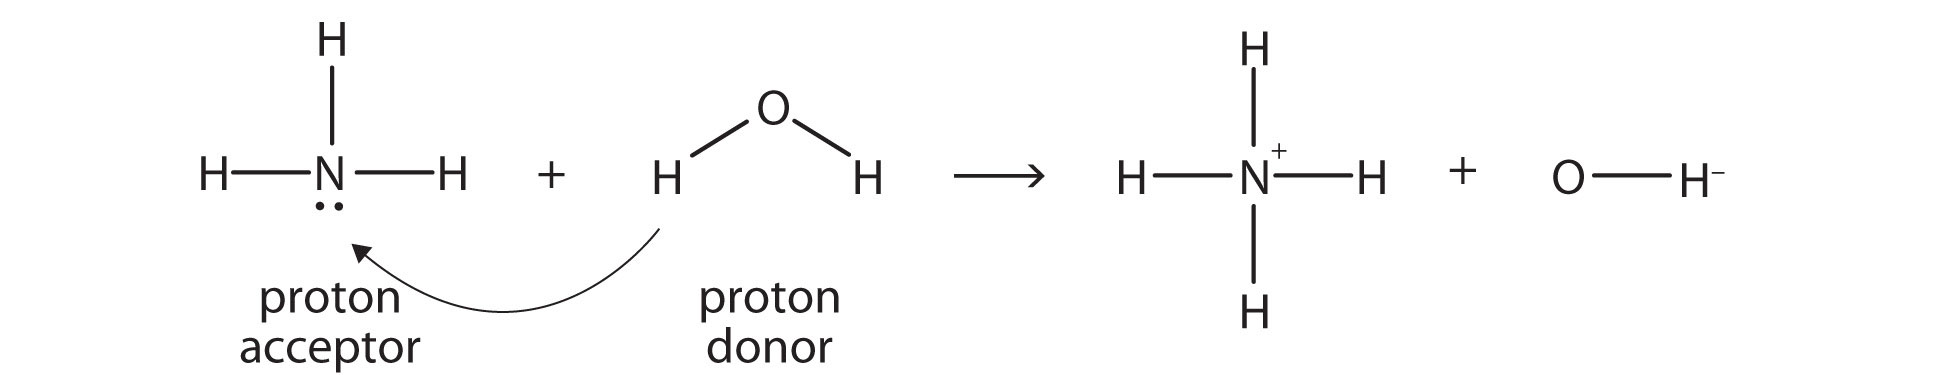 NH3 and H2O react to make NH4+ and OH-. The NH3 acts as the proton acceptor and the H2O acts as the proton donator. 